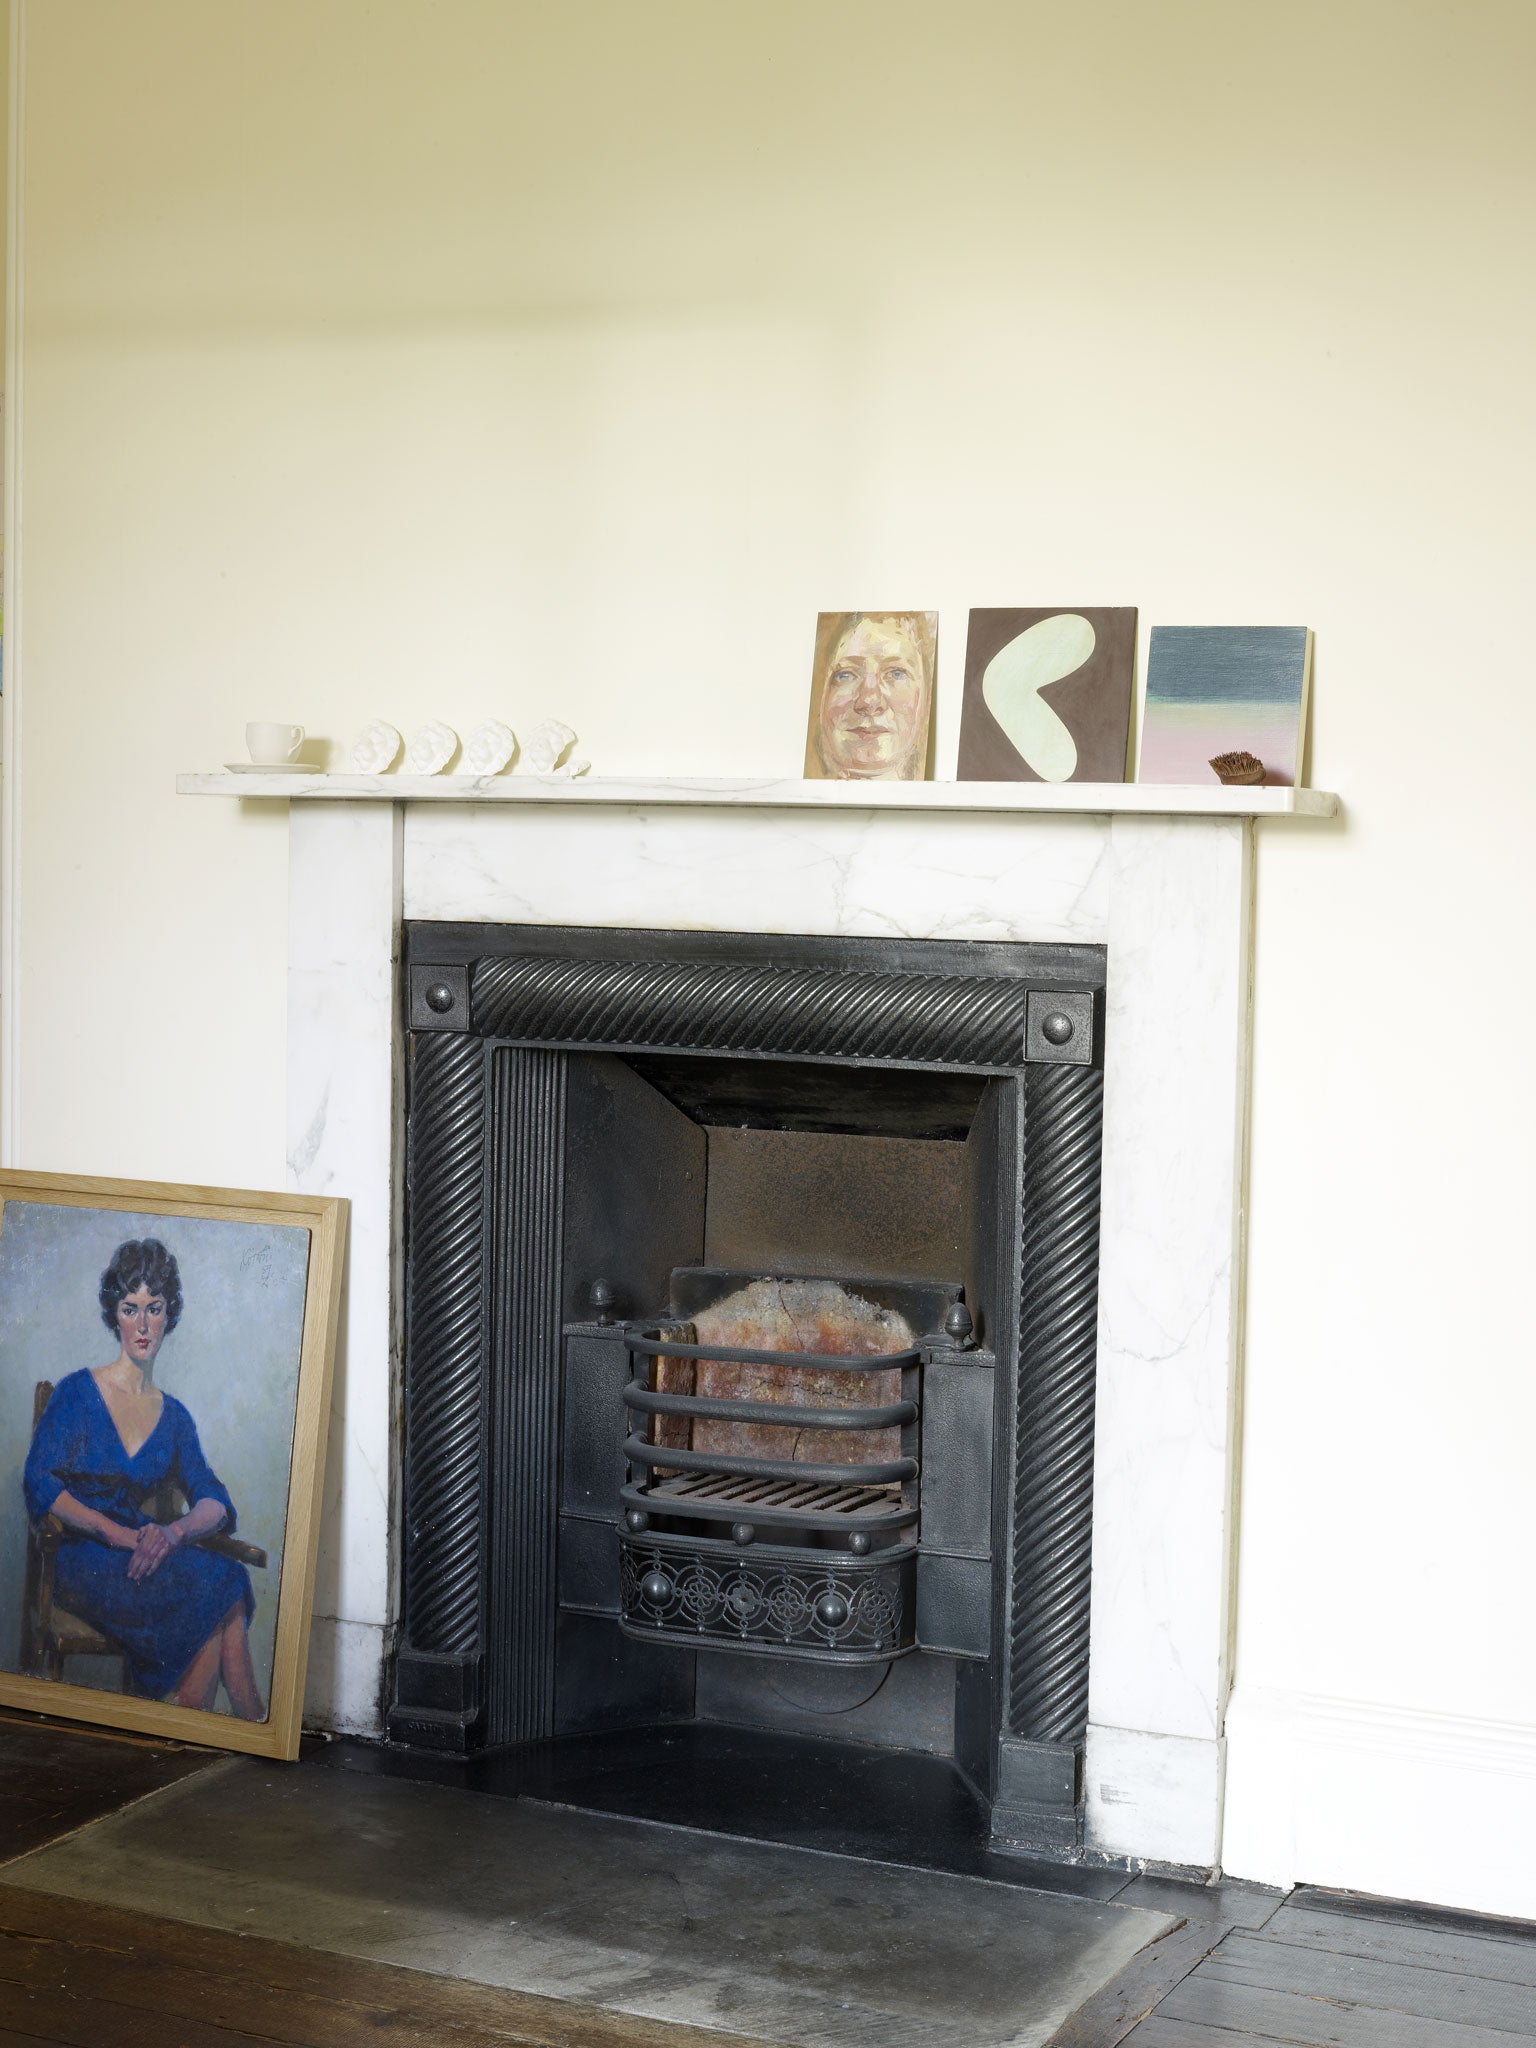 Many of the Regency features of the original house, such as the fireplaces, remain (Rachel Smith)